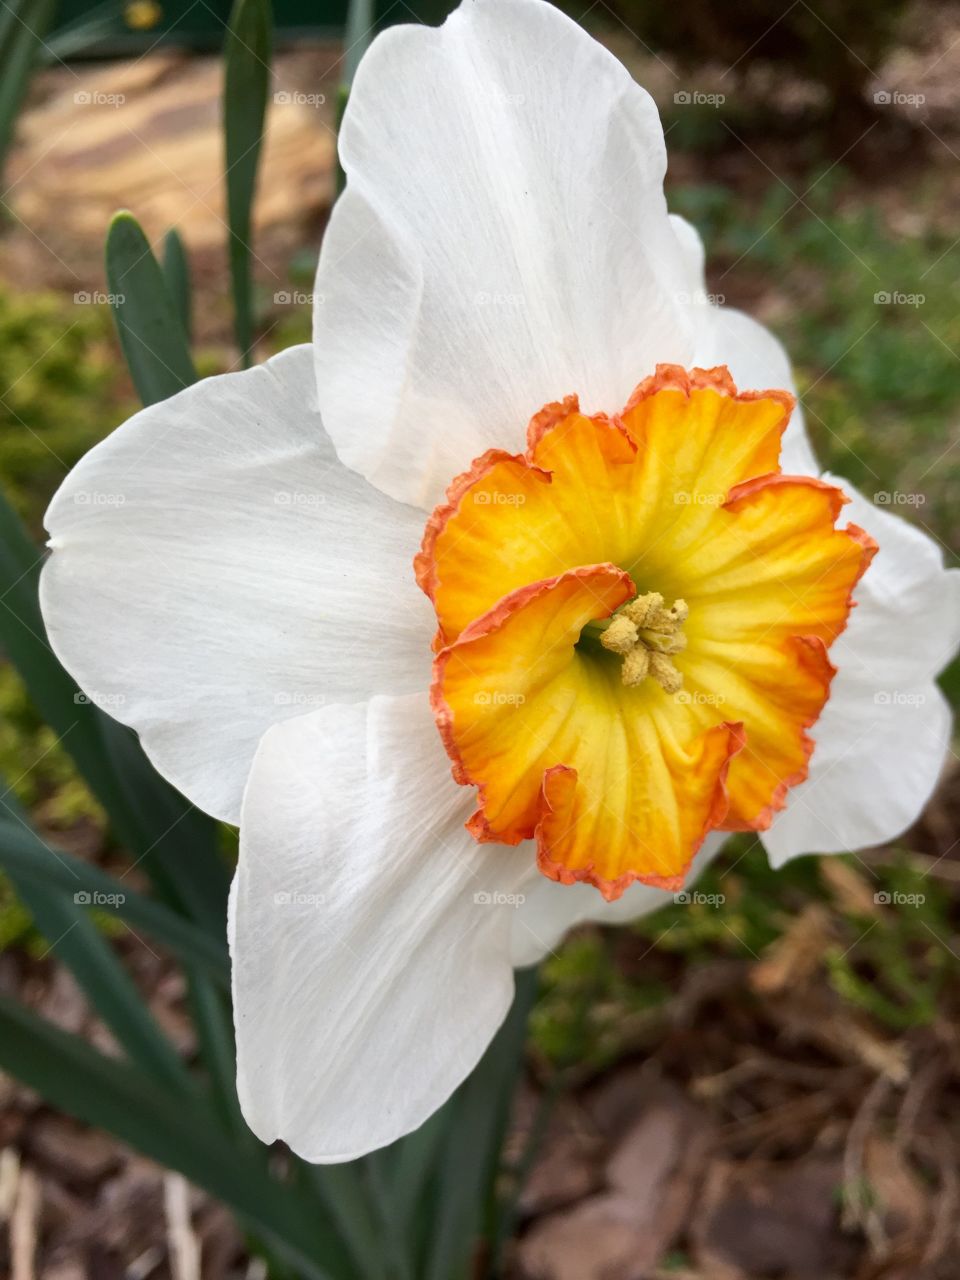 Narcissus bright face